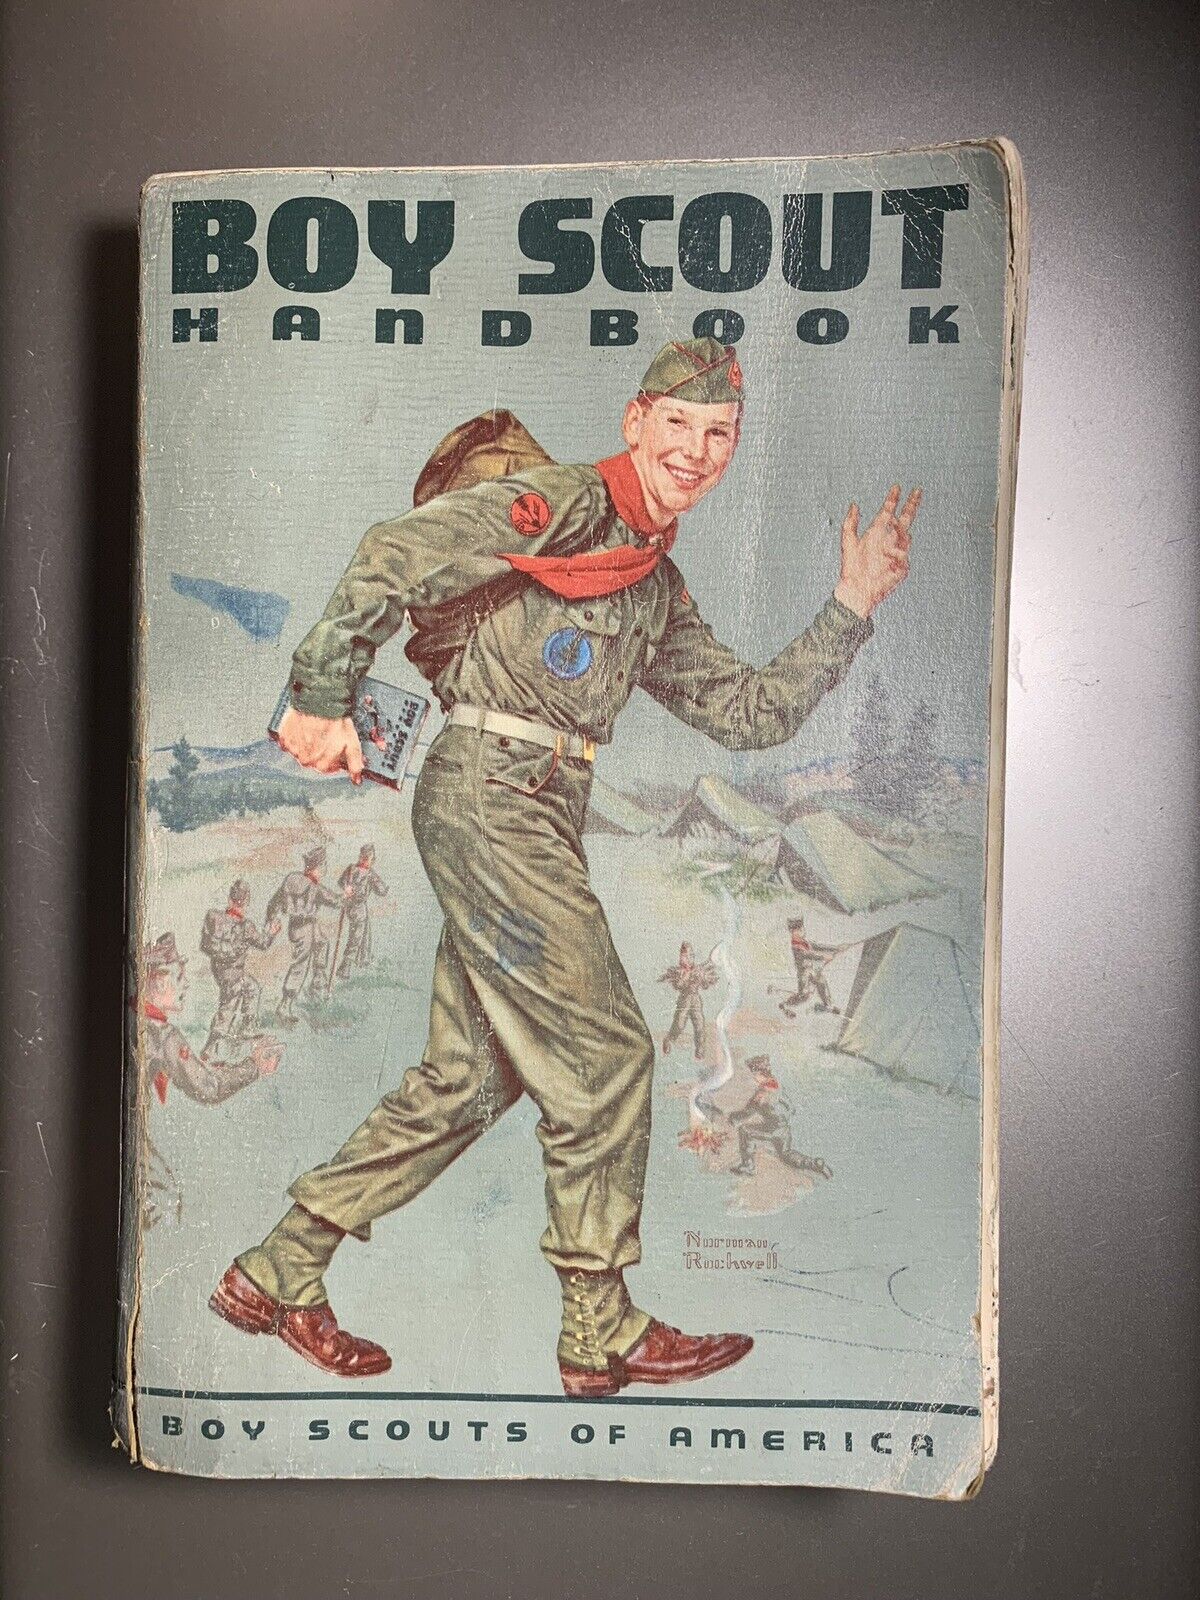 Vintage 1964 Boy Scout Handbook - Norman Rockwell Cover - Fair Condition